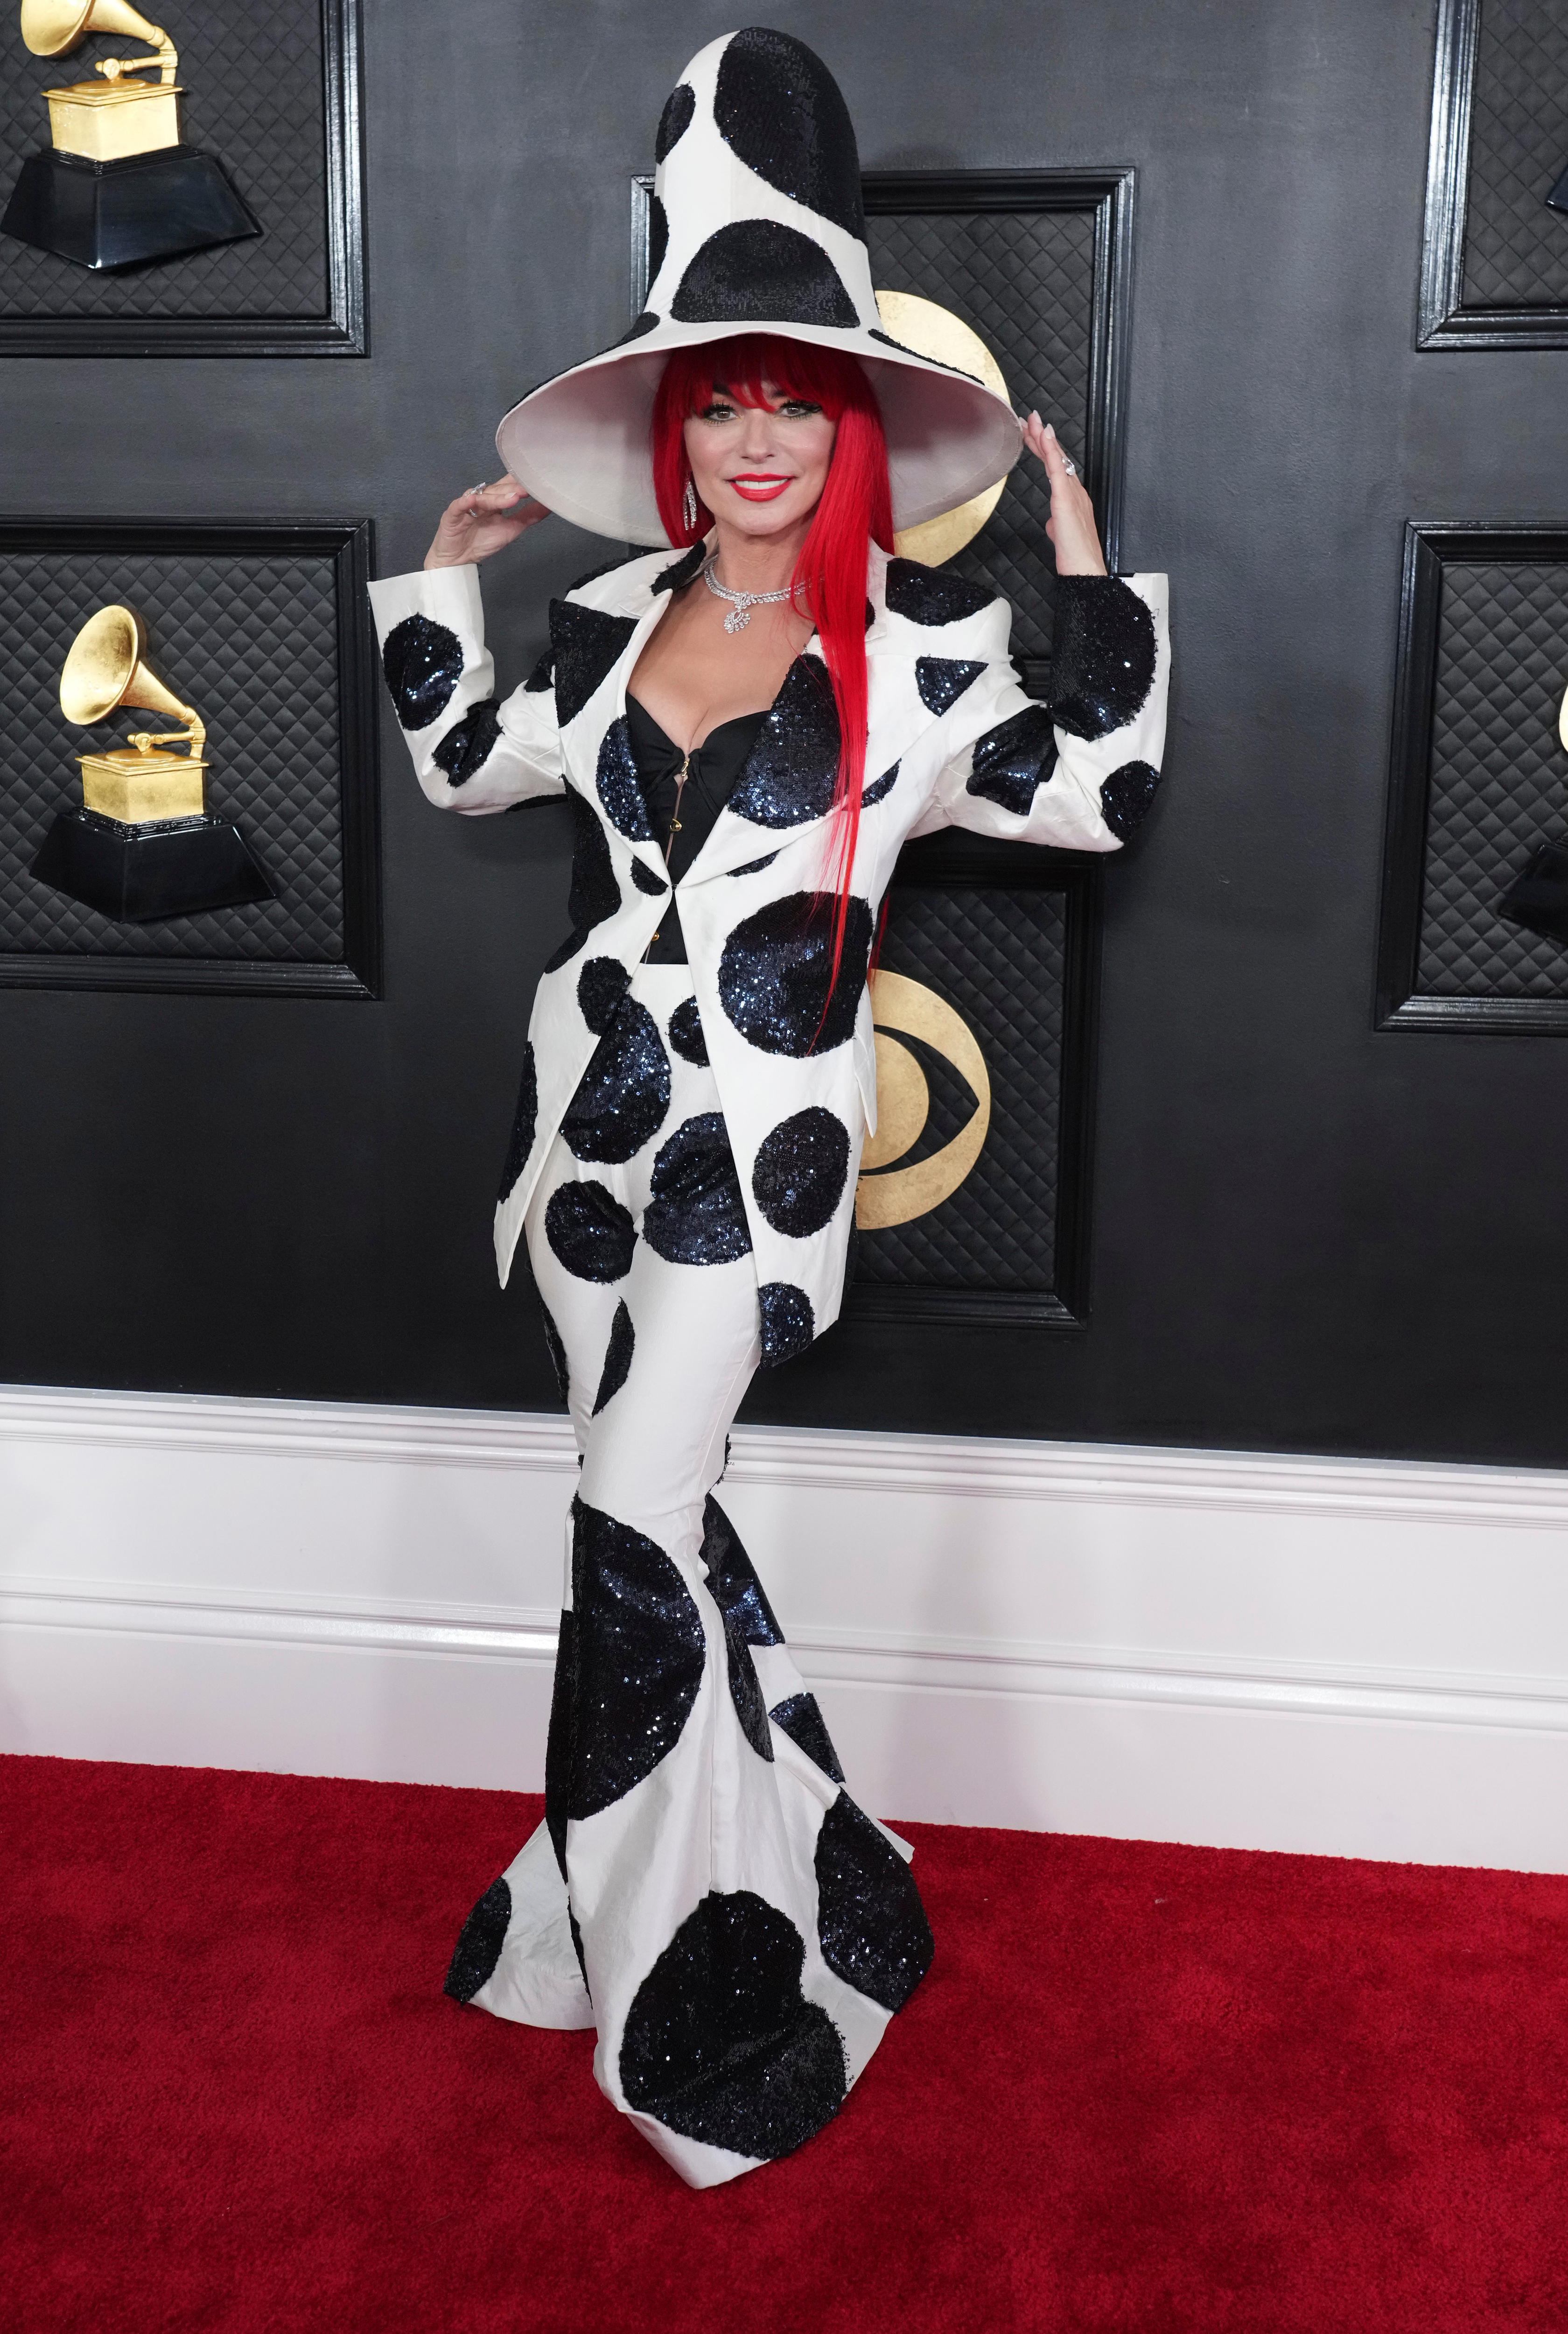 Shania Twain wearing a white, spotty suit with a matching hat and a bright red wig. 